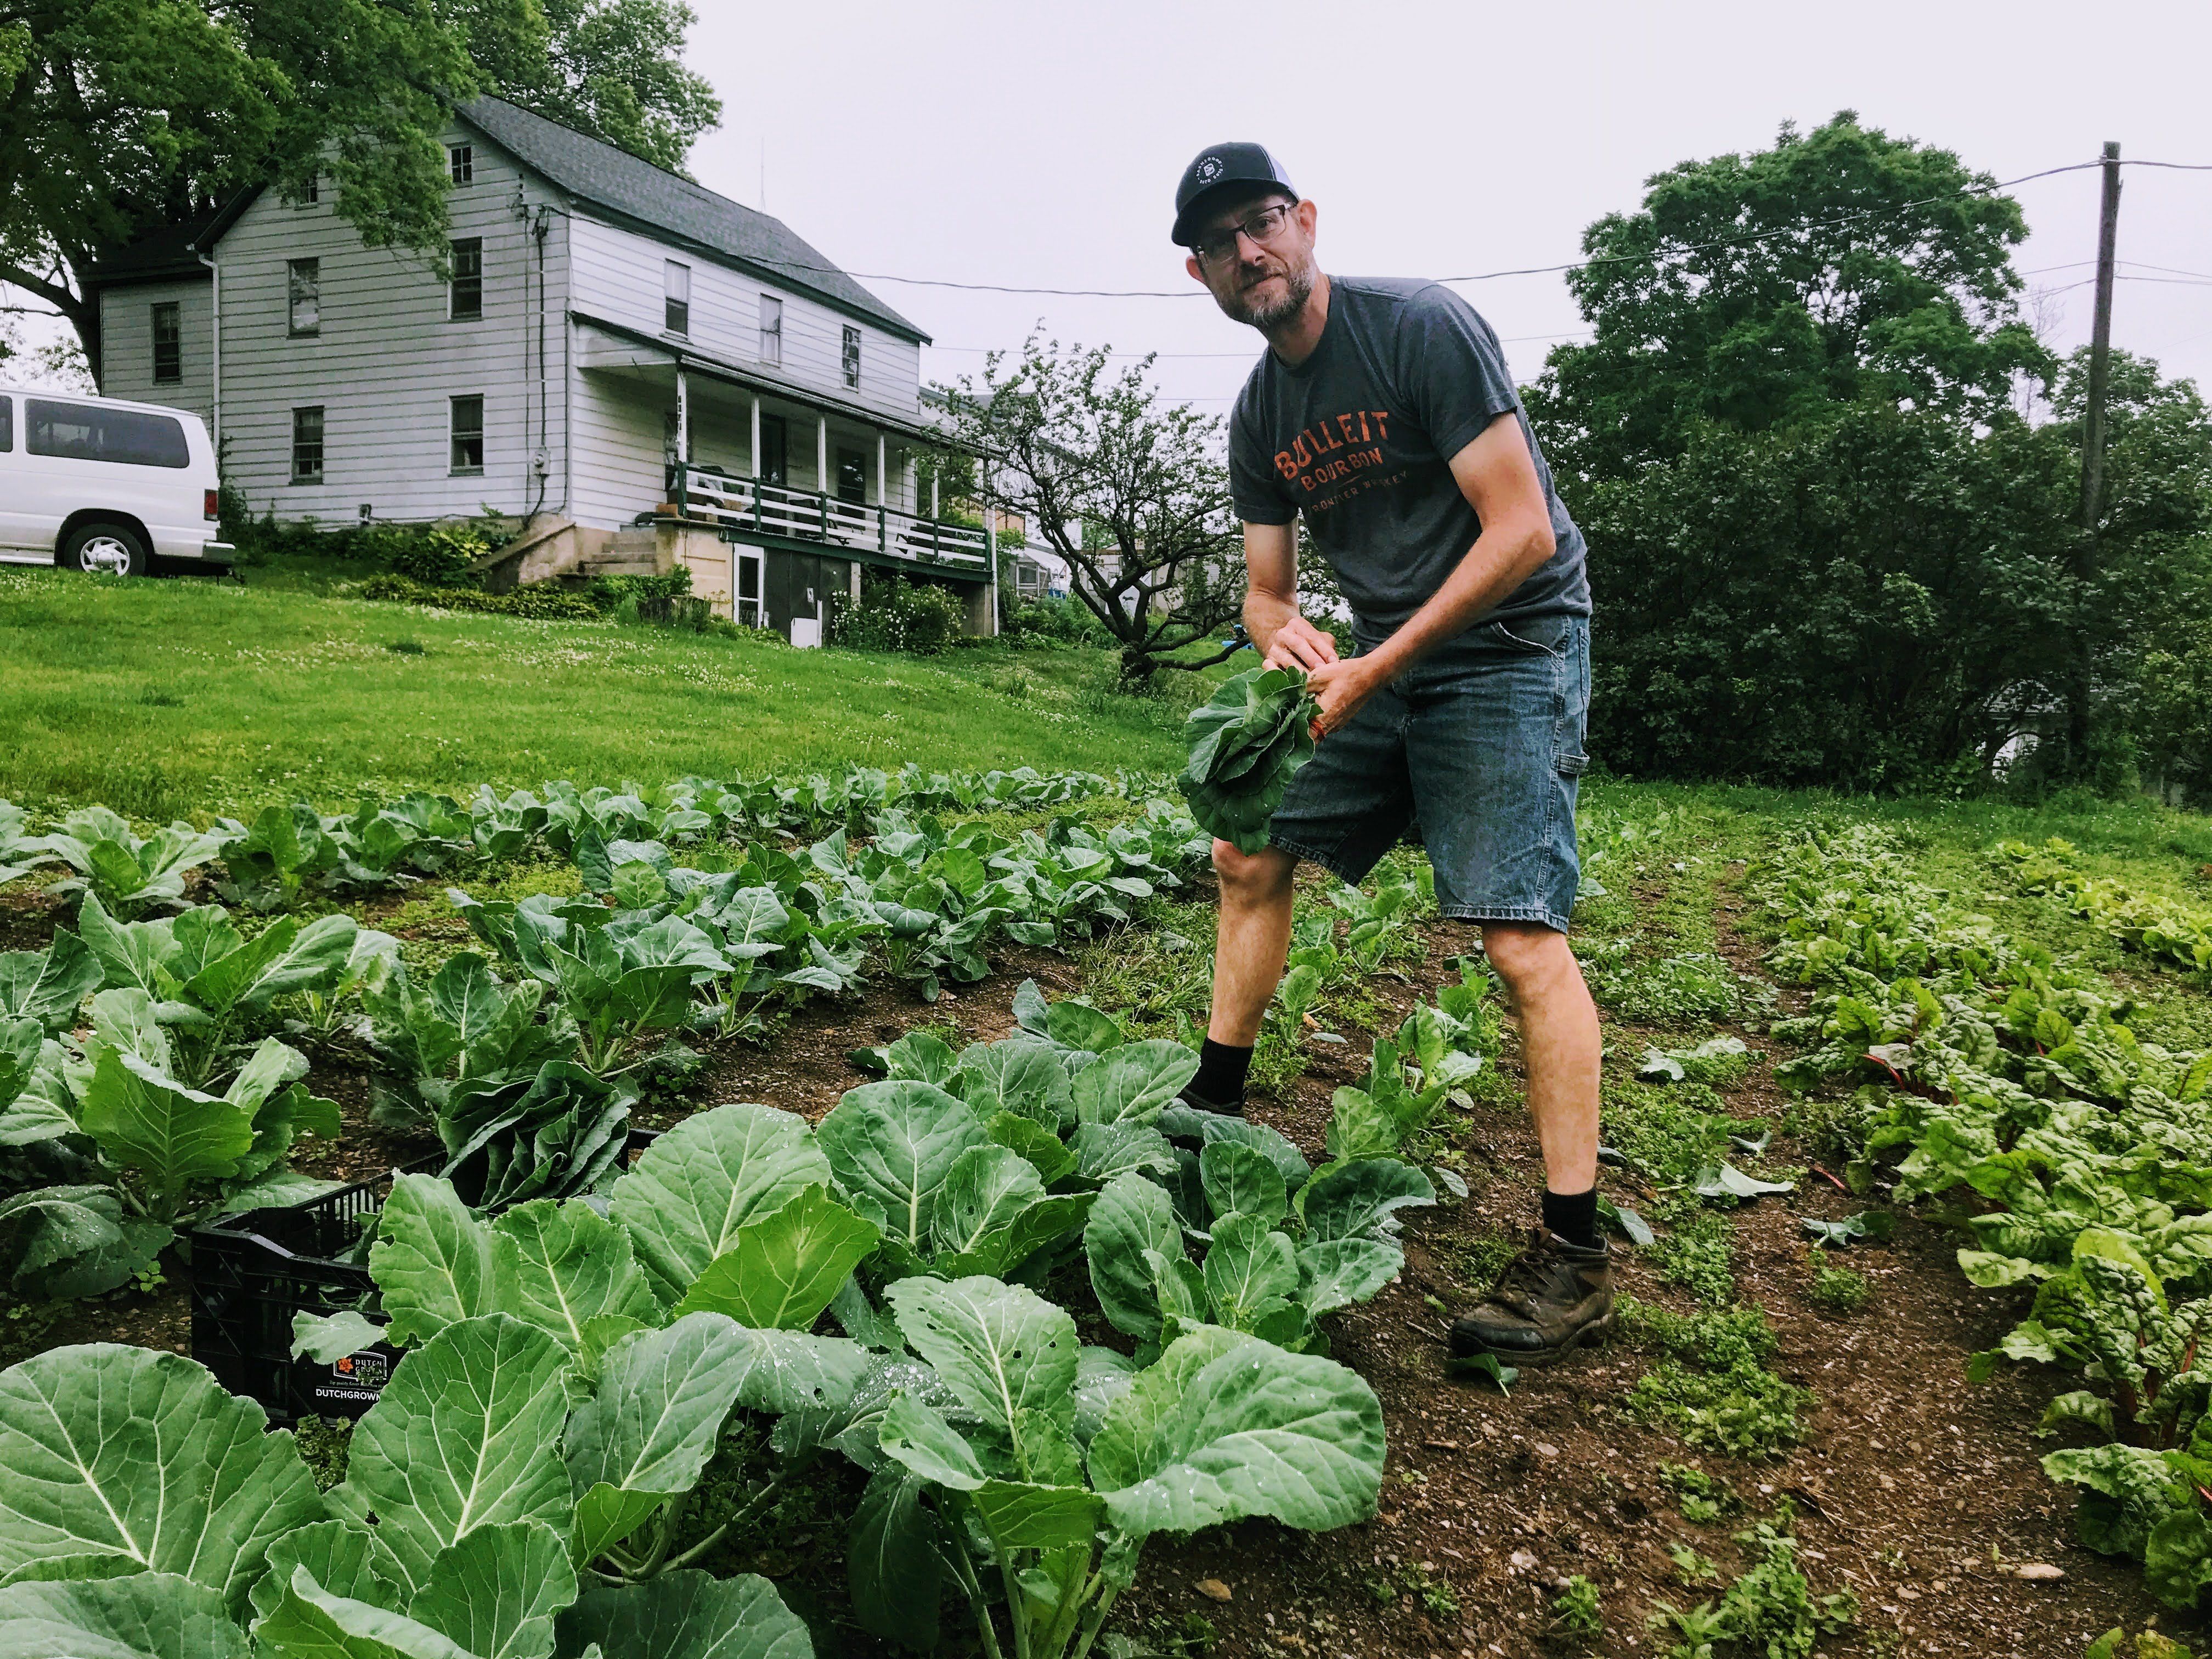 Previous Happening: Farmer learns how to save veggies from the bugs